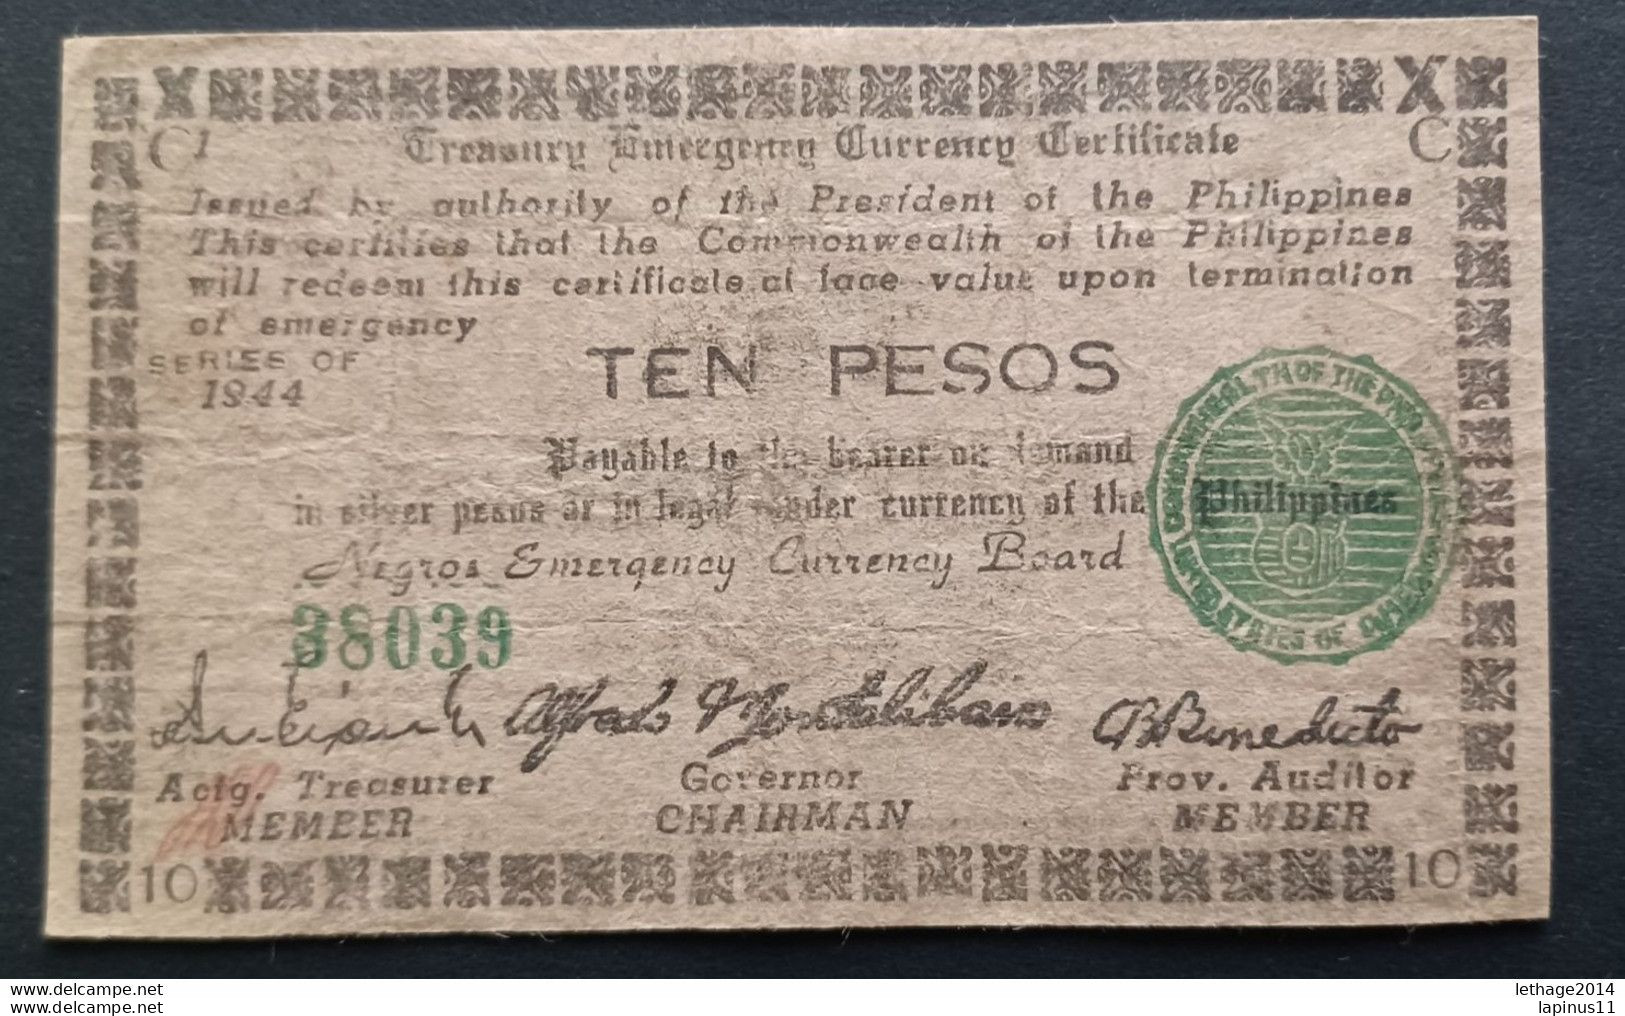 BANKNOTE PHILIPPINES 1944 Emergency Issue Negros Emergency Currency Board PRINTAGE 800,000 CIRCULATED - Filipinas